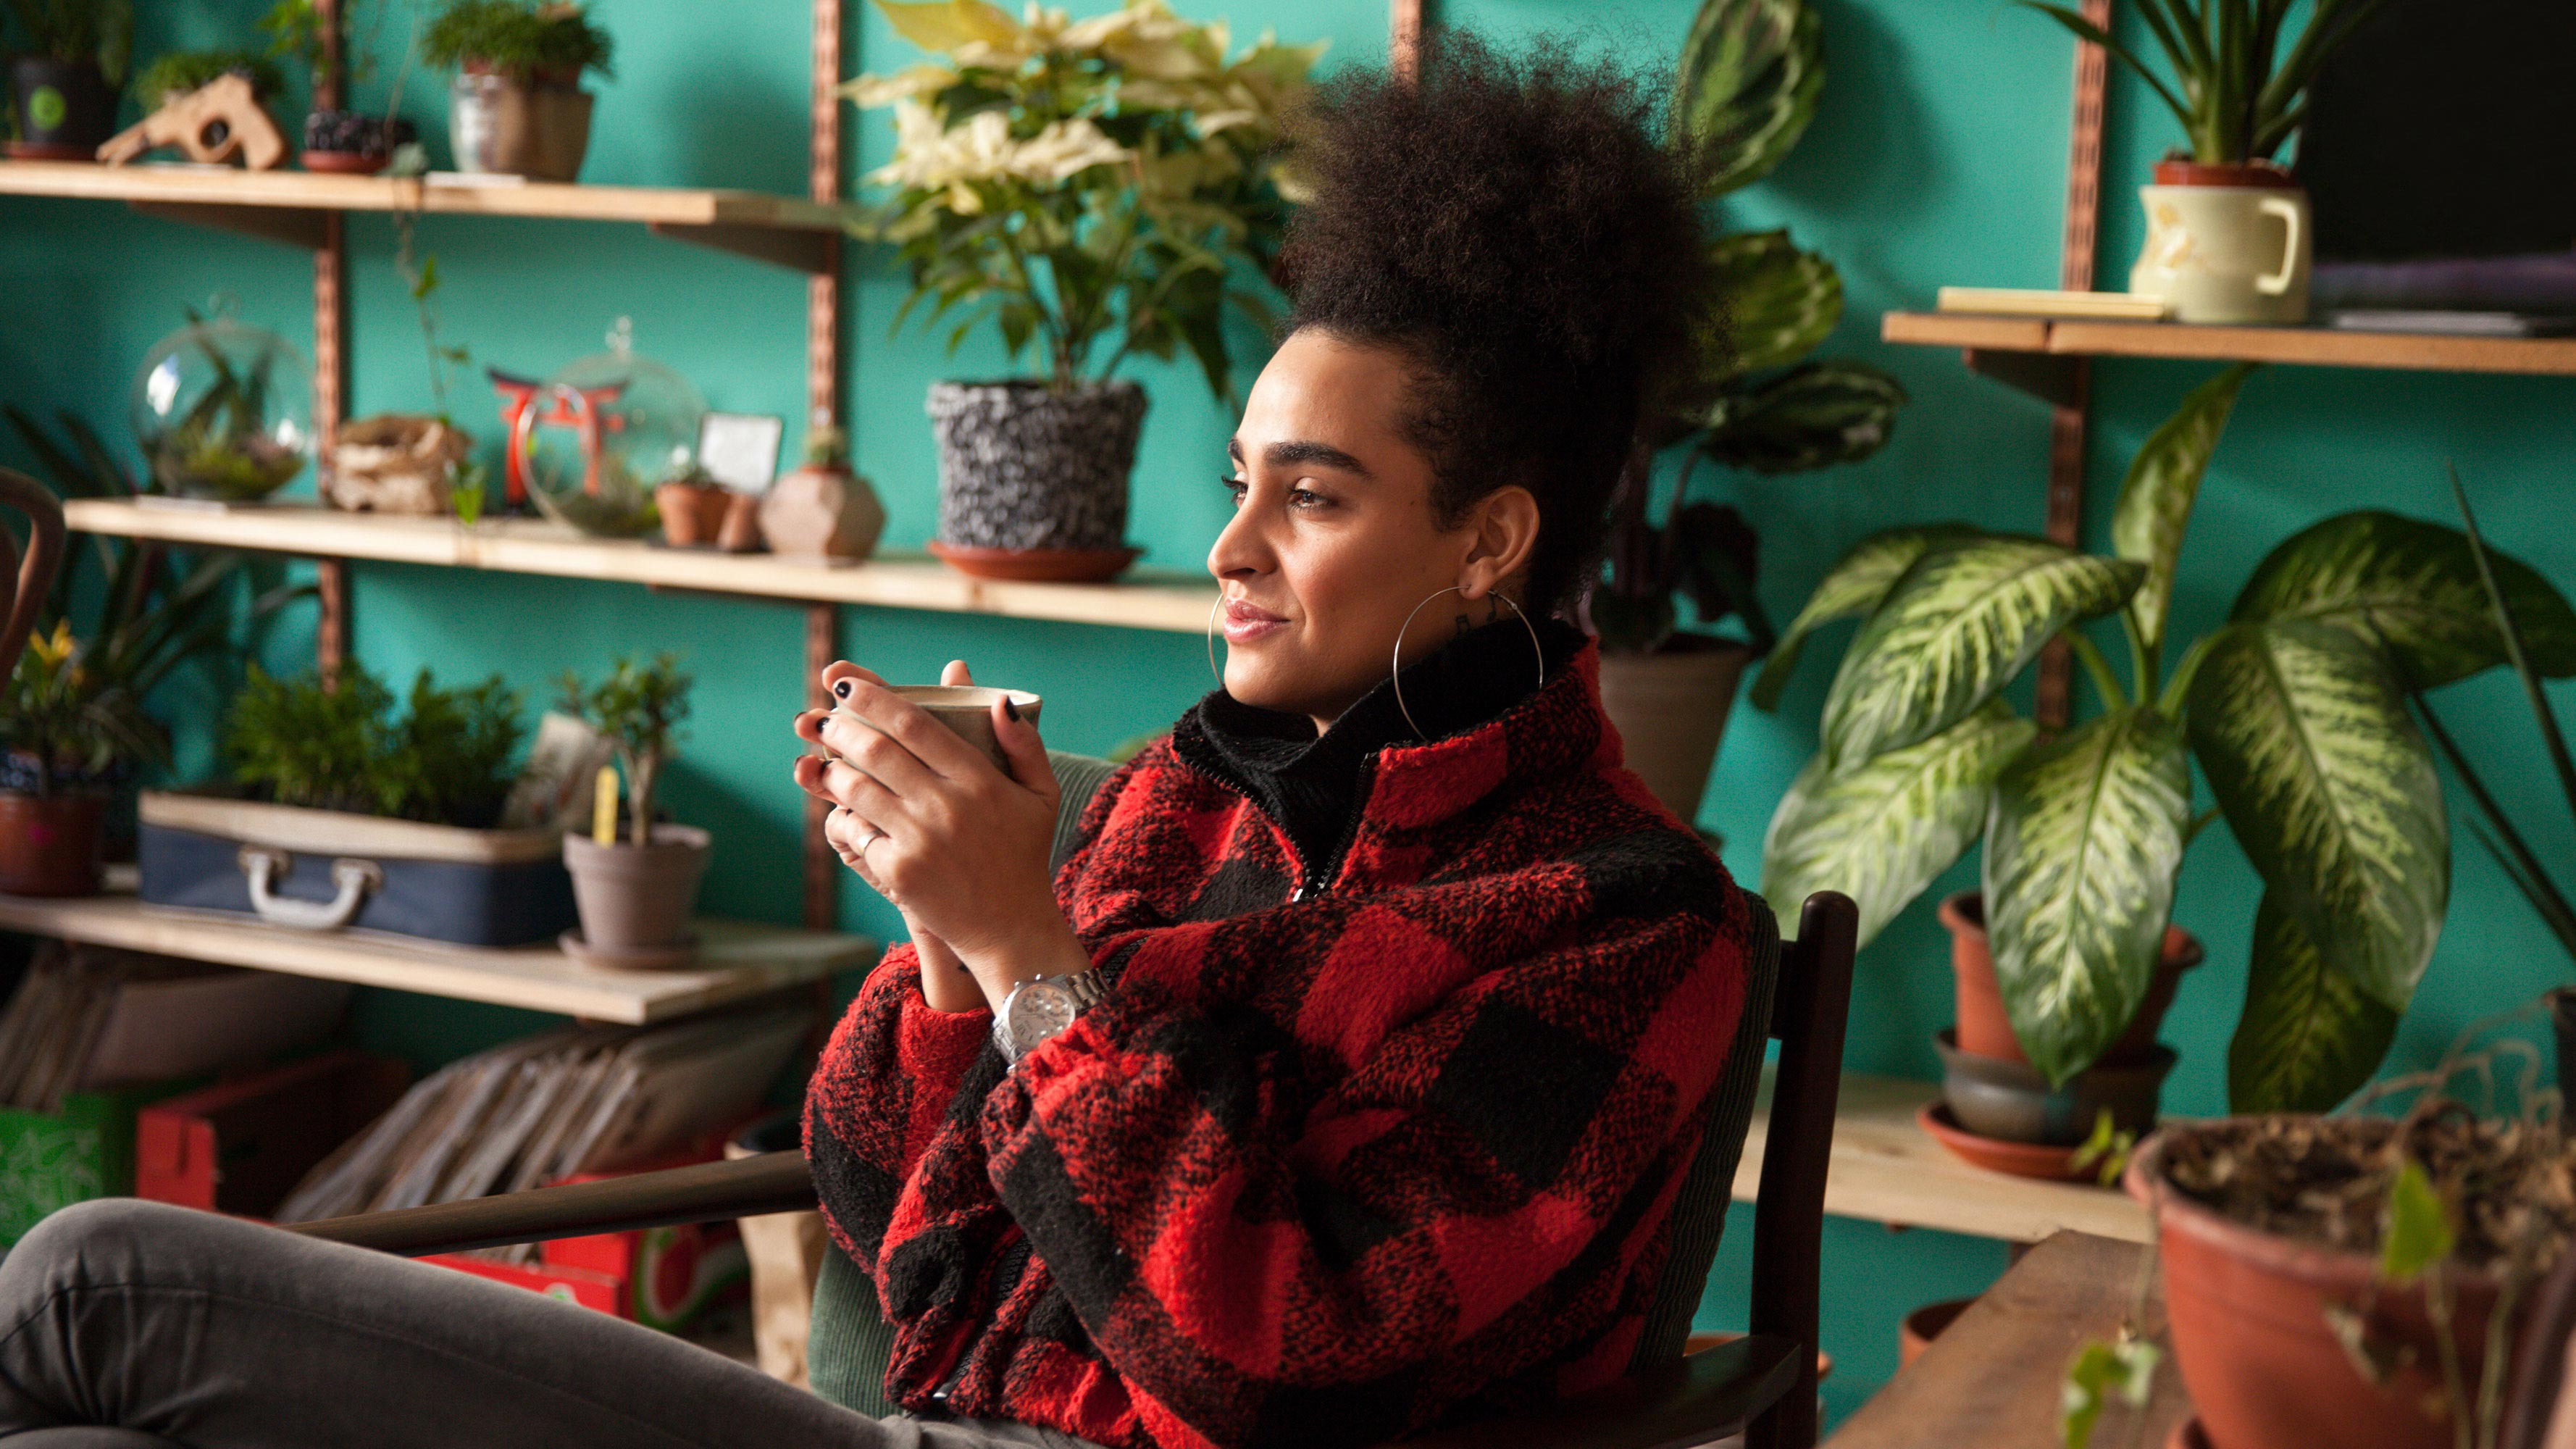 A woman, wearing a red and black sweater, holds a cup of tea with both hands while relaxing in her plant-filled living room.